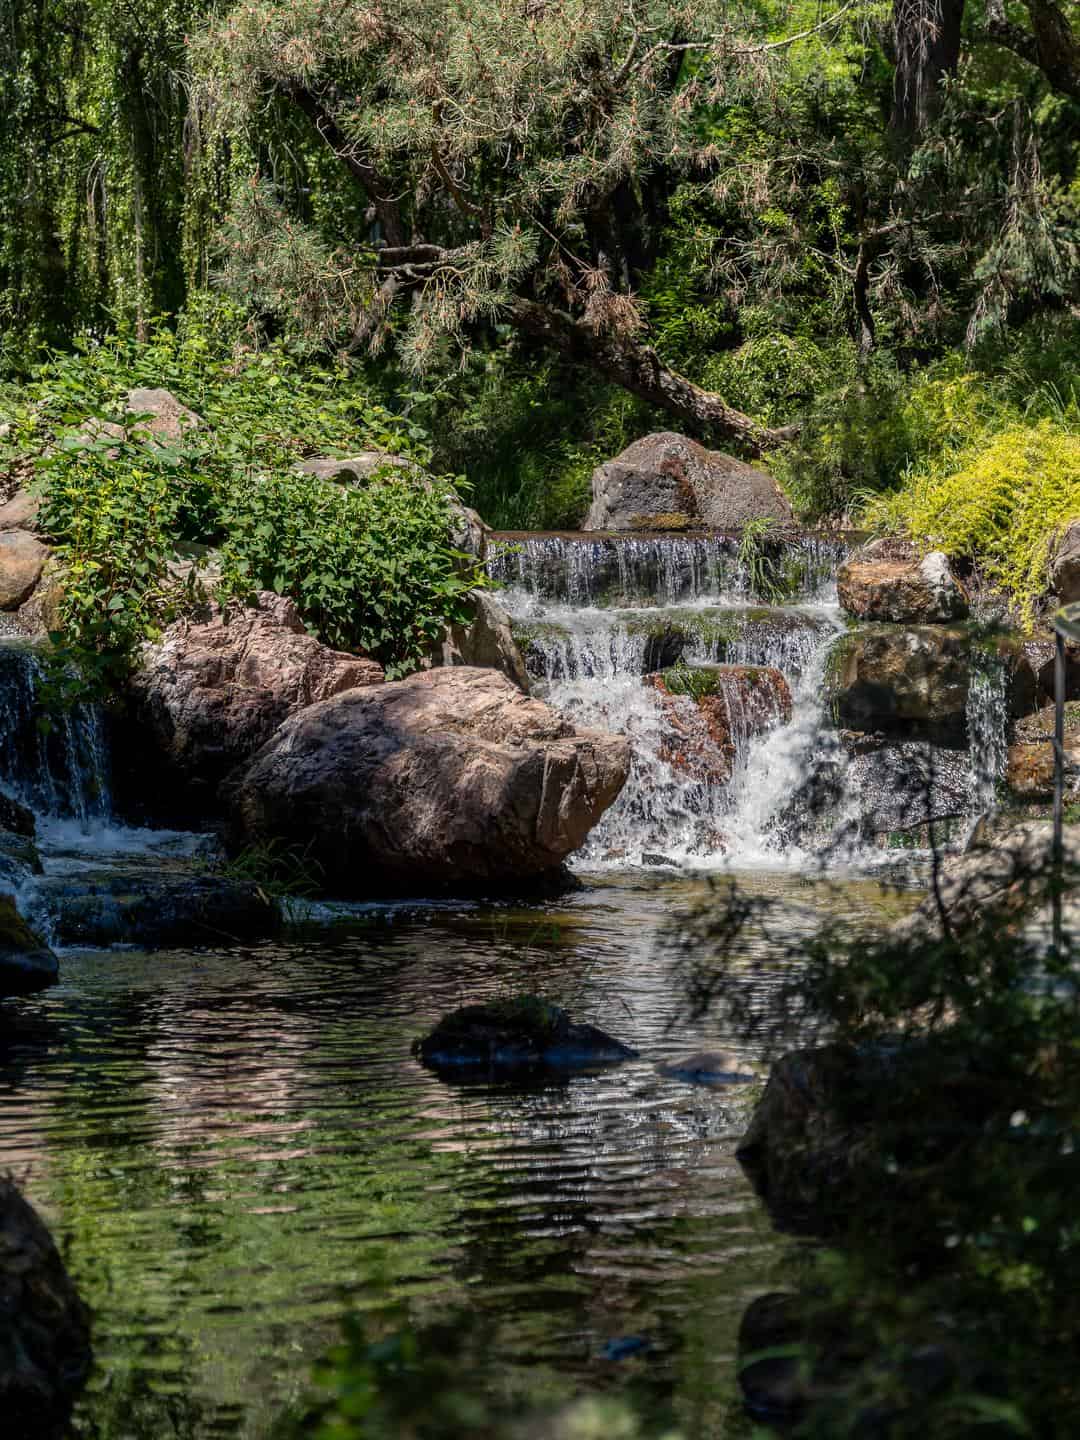 Waterfalls and lush trees in Claudia's Garden at Gilroy Gardens